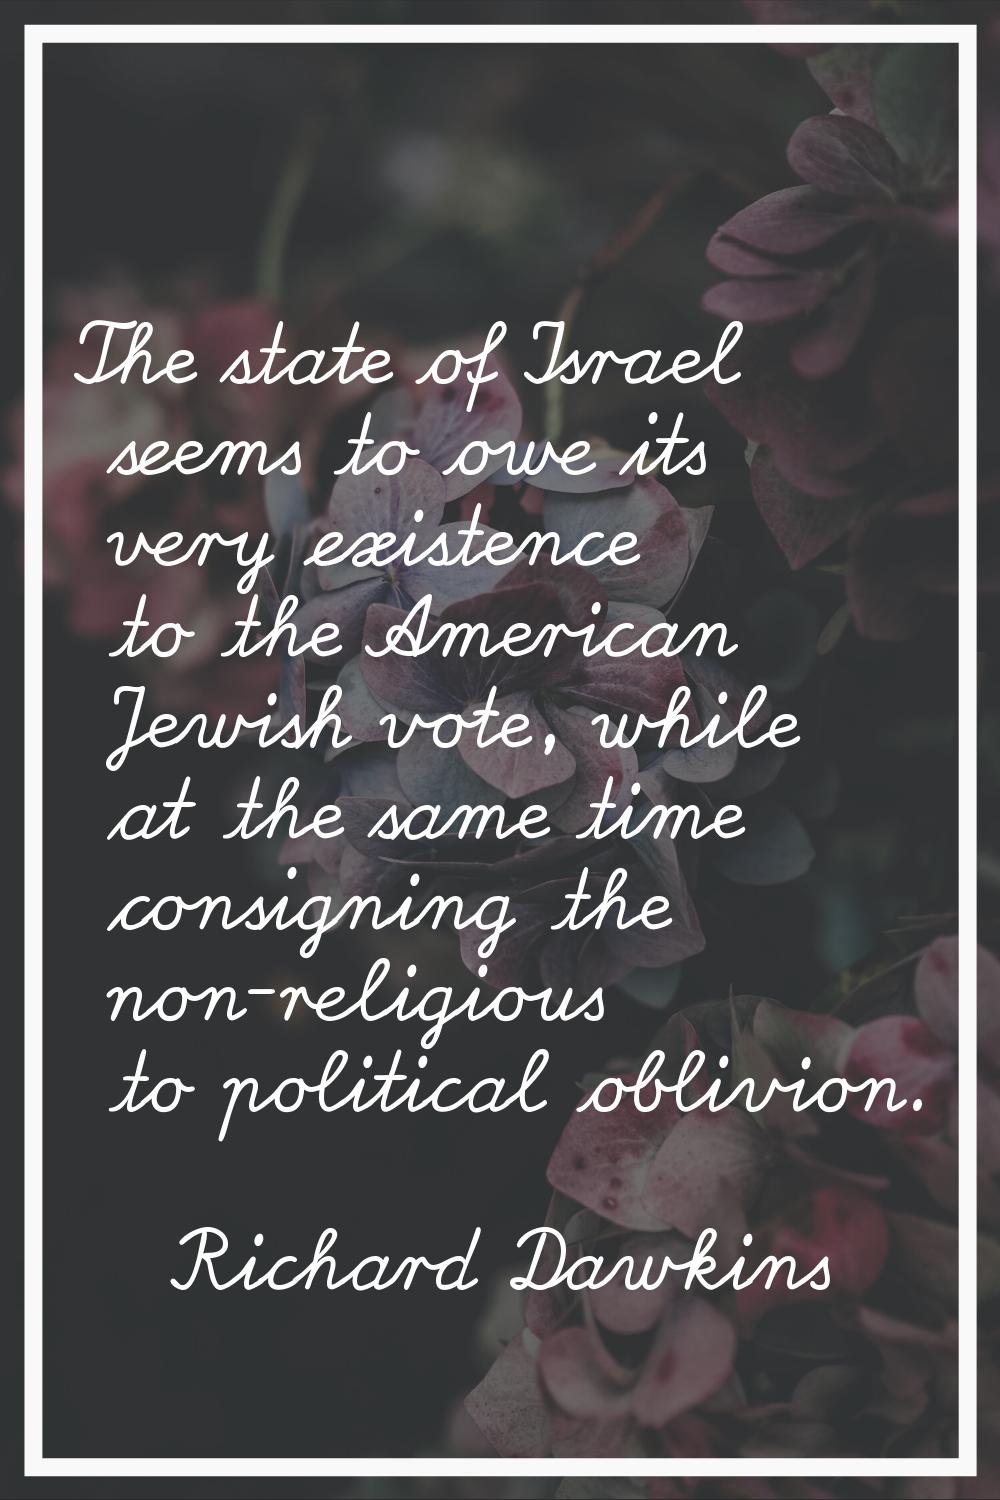 The state of Israel seems to owe its very existence to the American Jewish vote, while at the same 